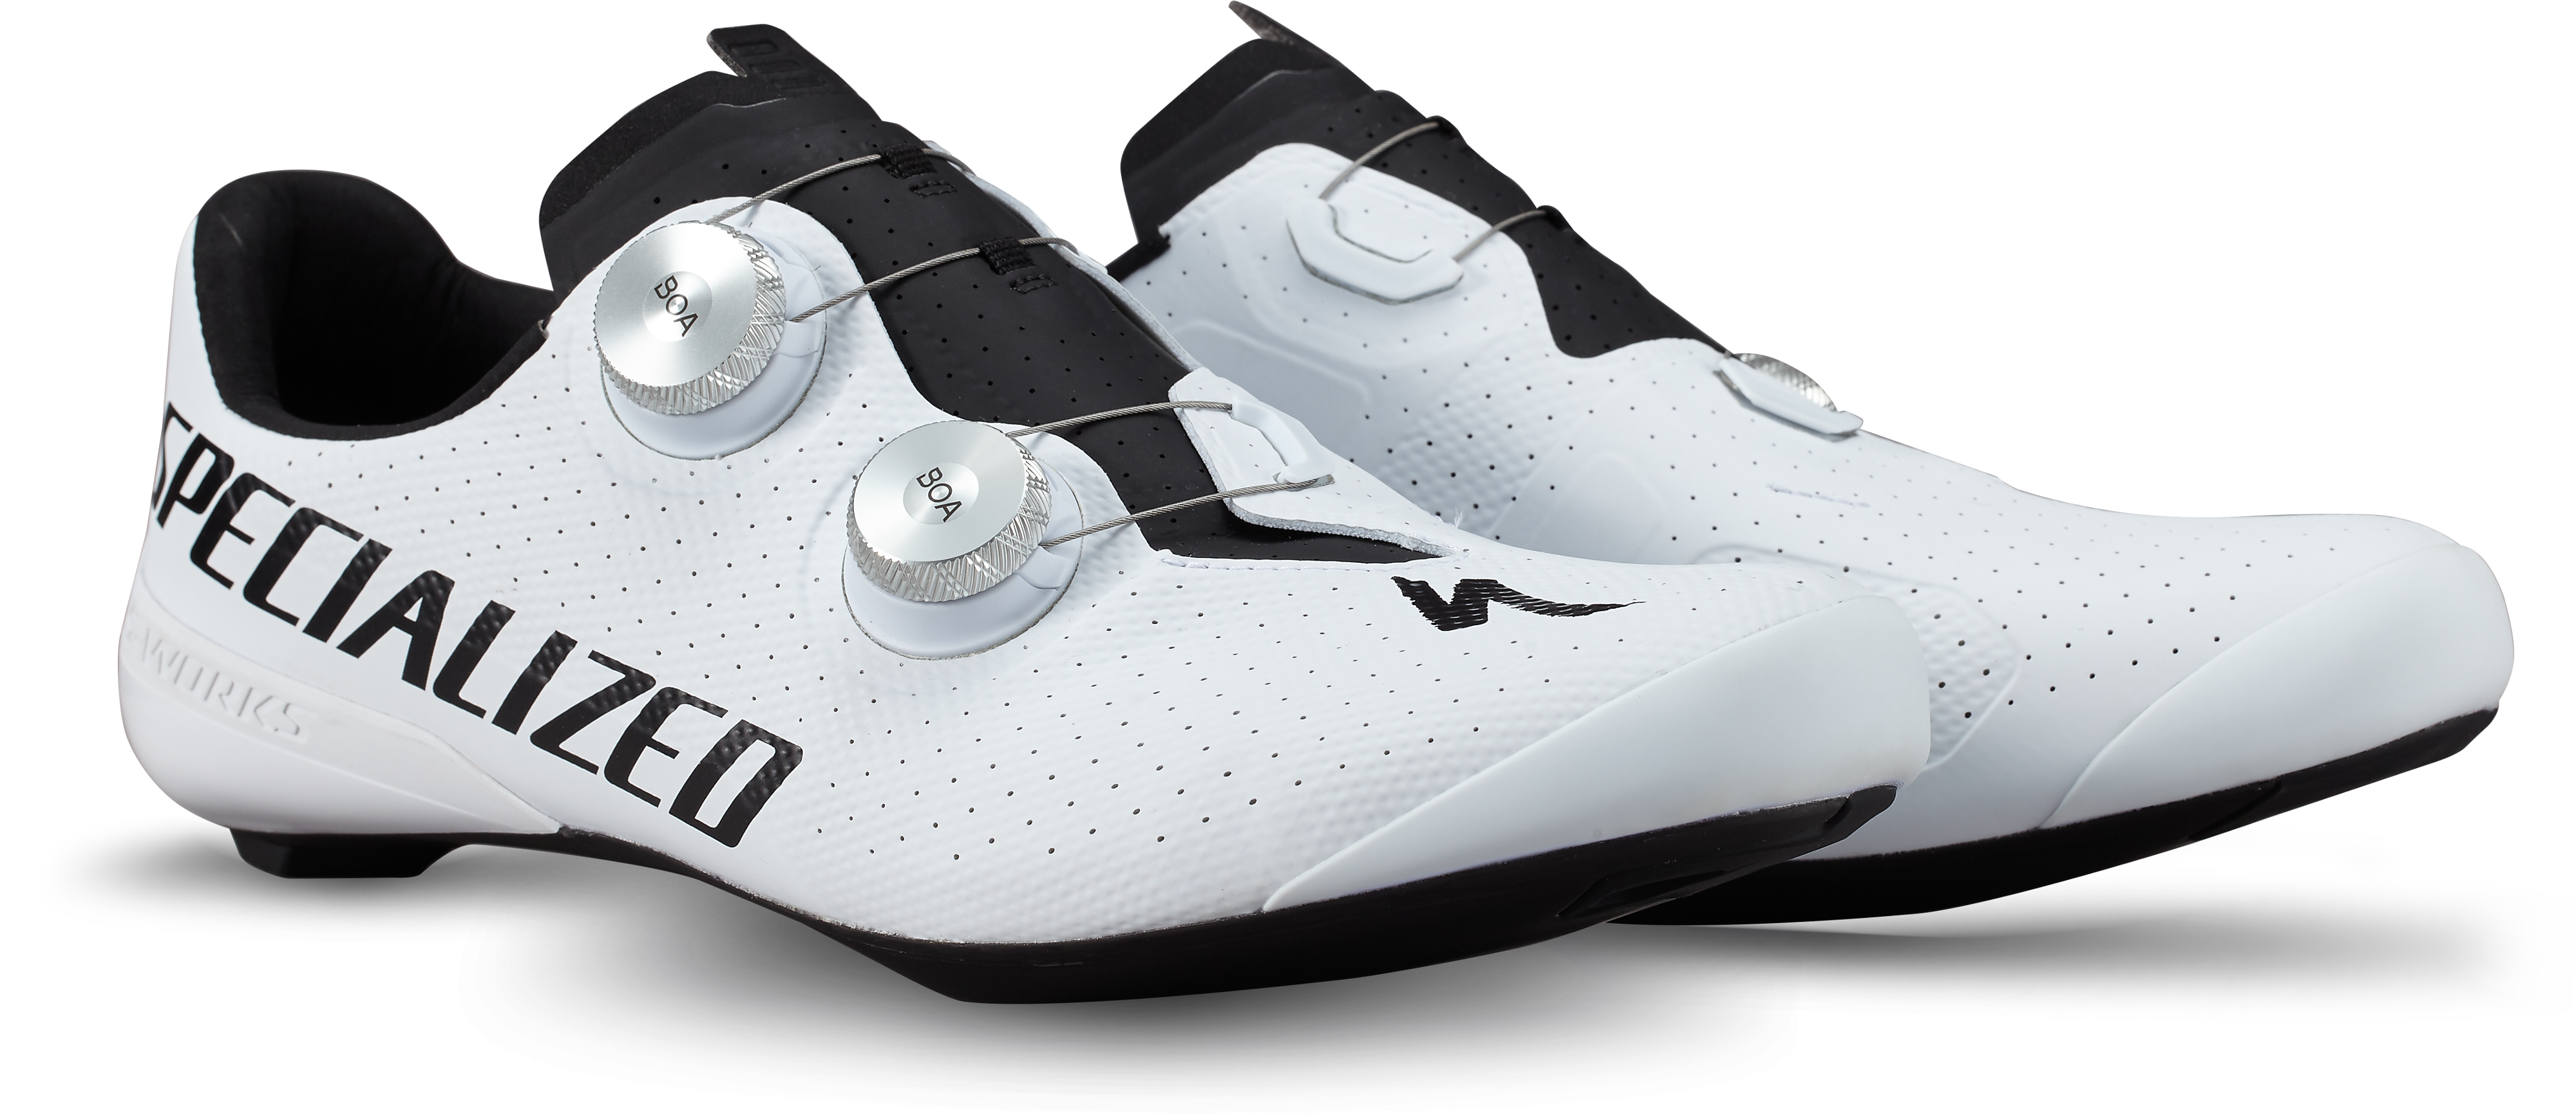 S-WORKS TORCH ROAD SHOES TEAM WHT 39(39 (25cm) チームホワイト 